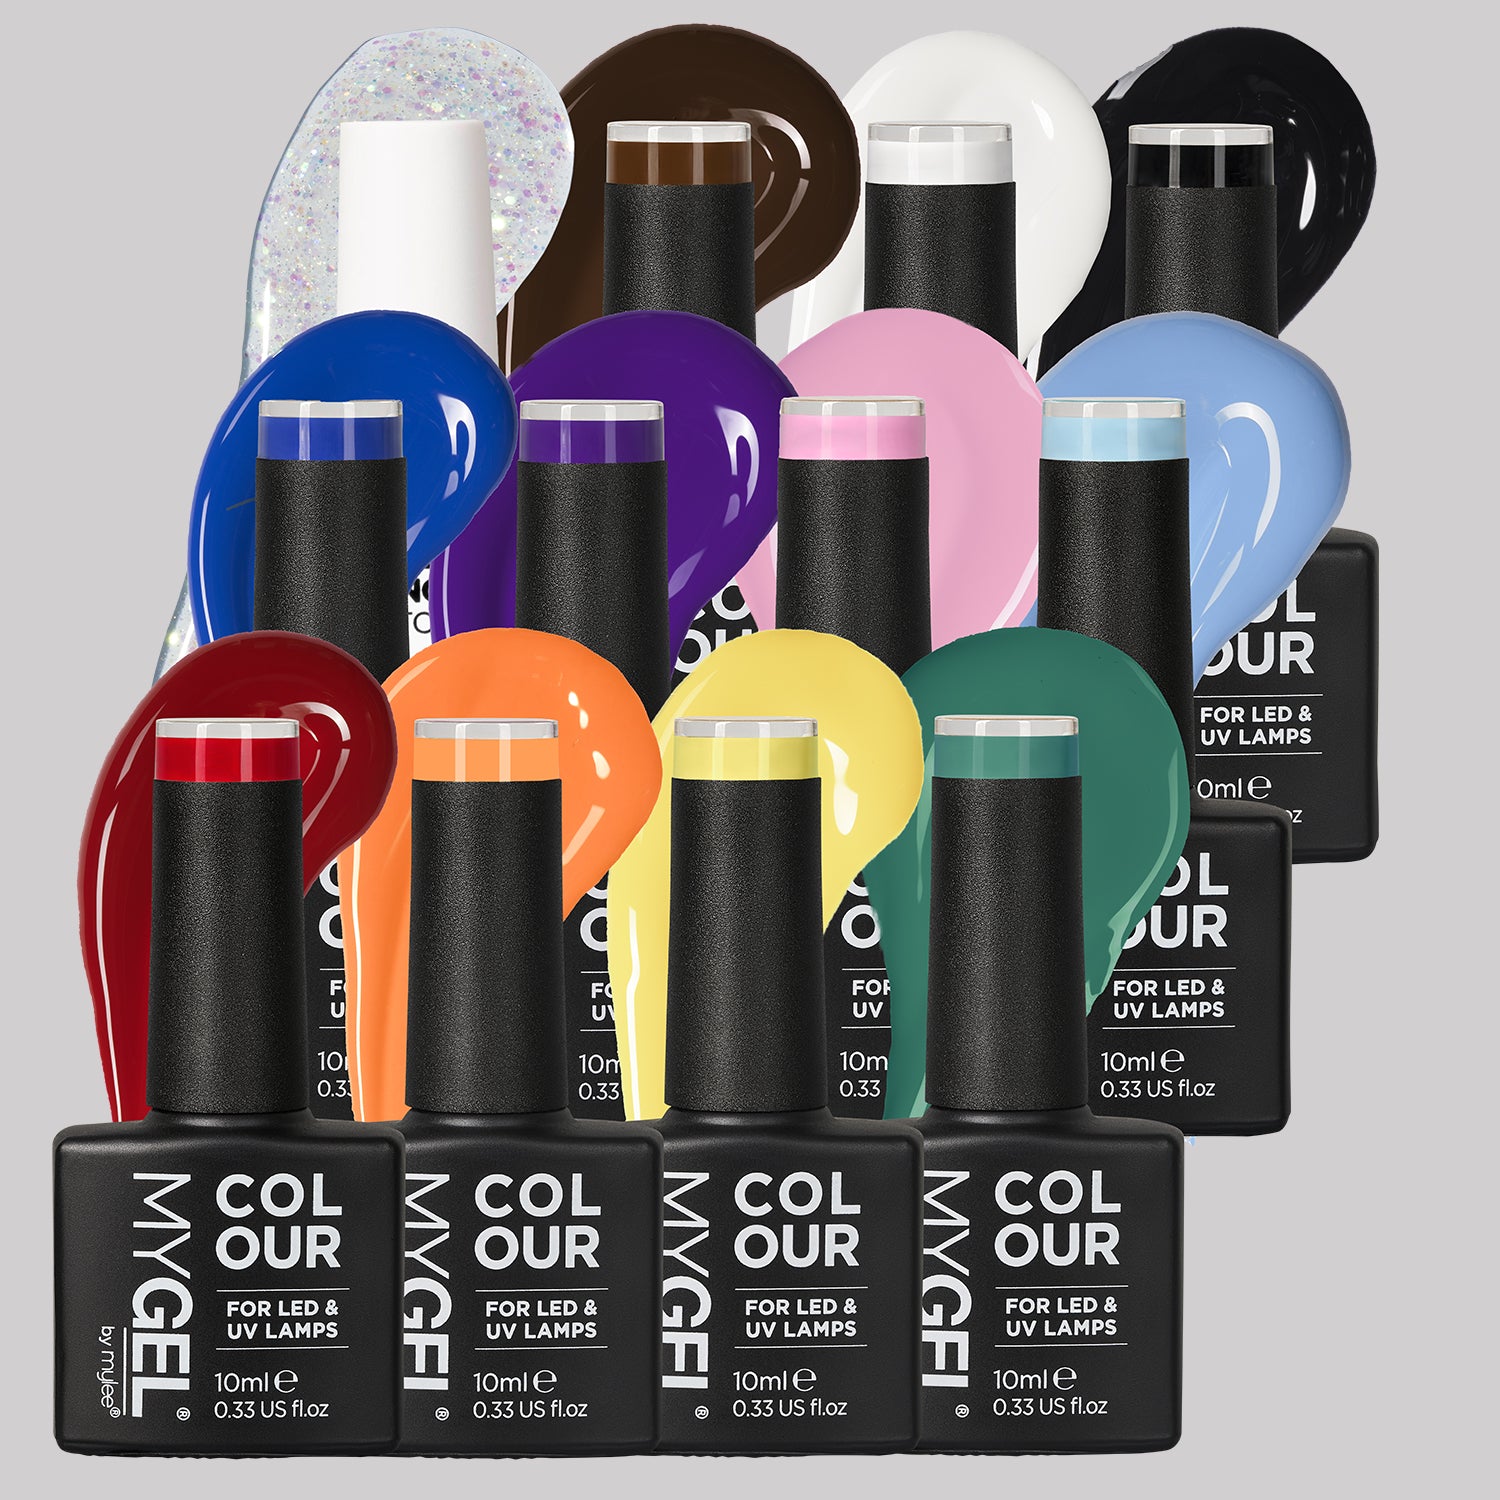 Image of Mylee Pride LED/UV Gel Nail Polish Collection – Long Lasting At Home Manicure/Pedicure, High Gloss And Chip Free Wear Nail Varnish